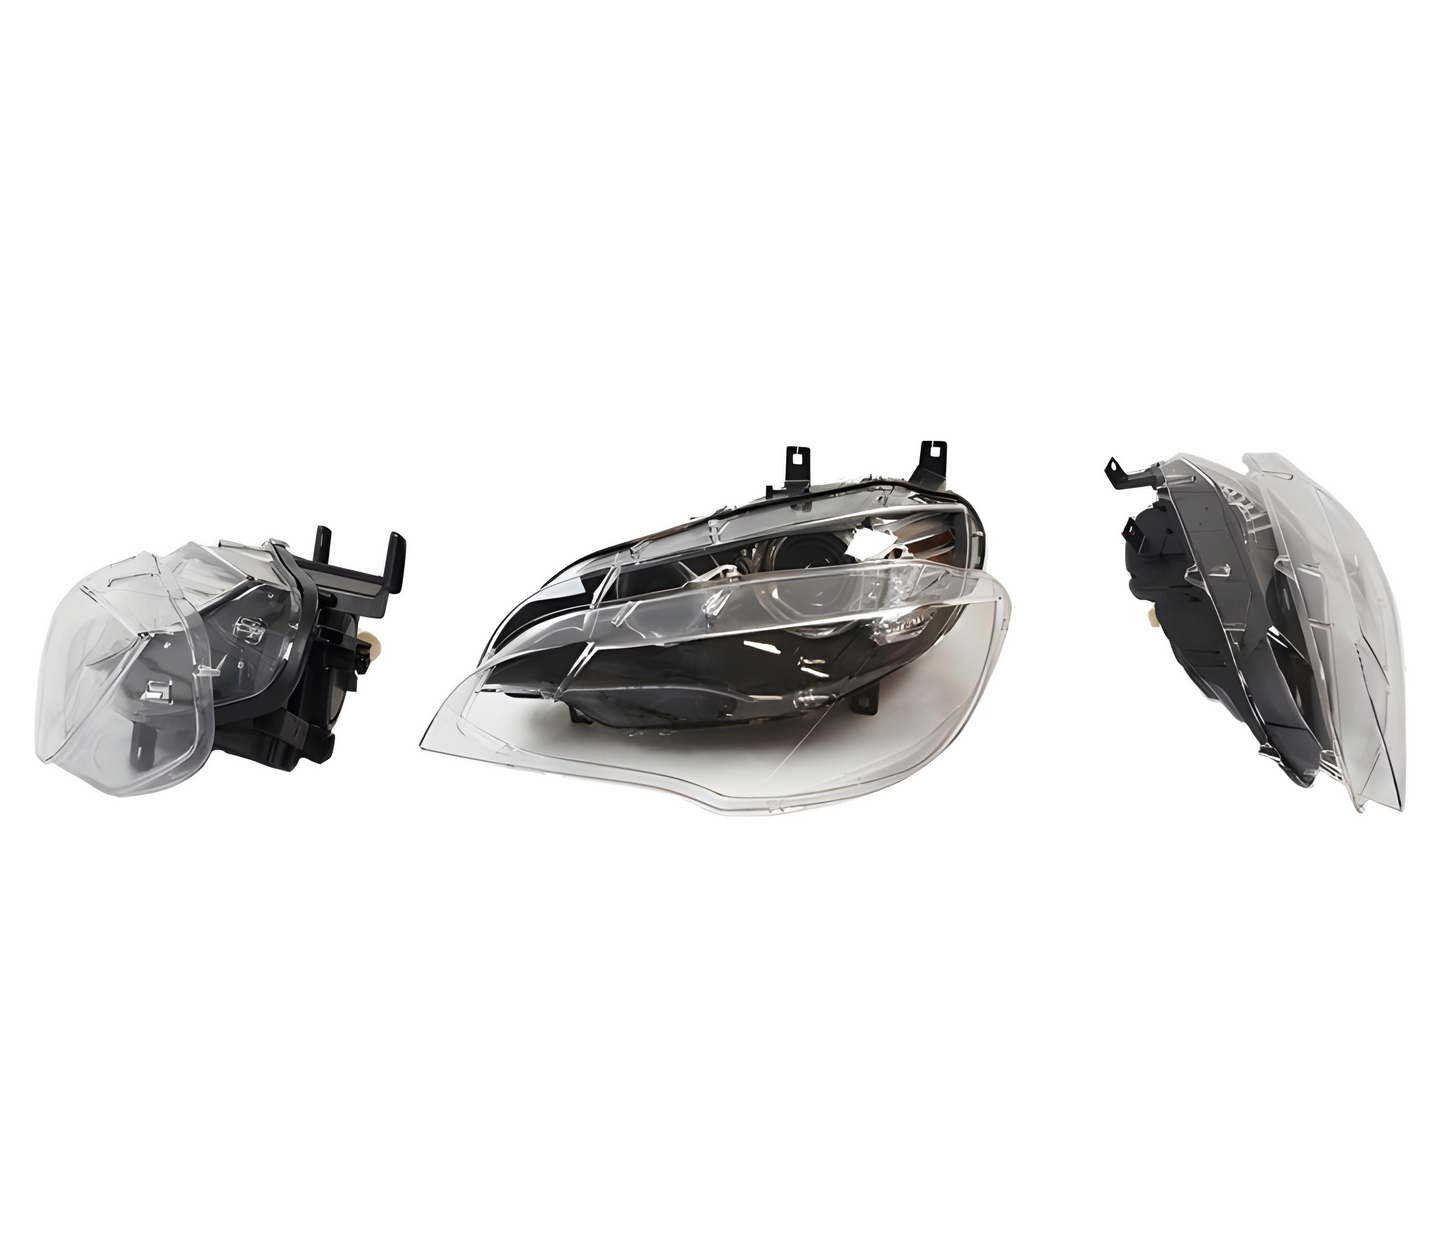 Headlight Lens covers for Mercedes Benz GL X164 (2006-2012)